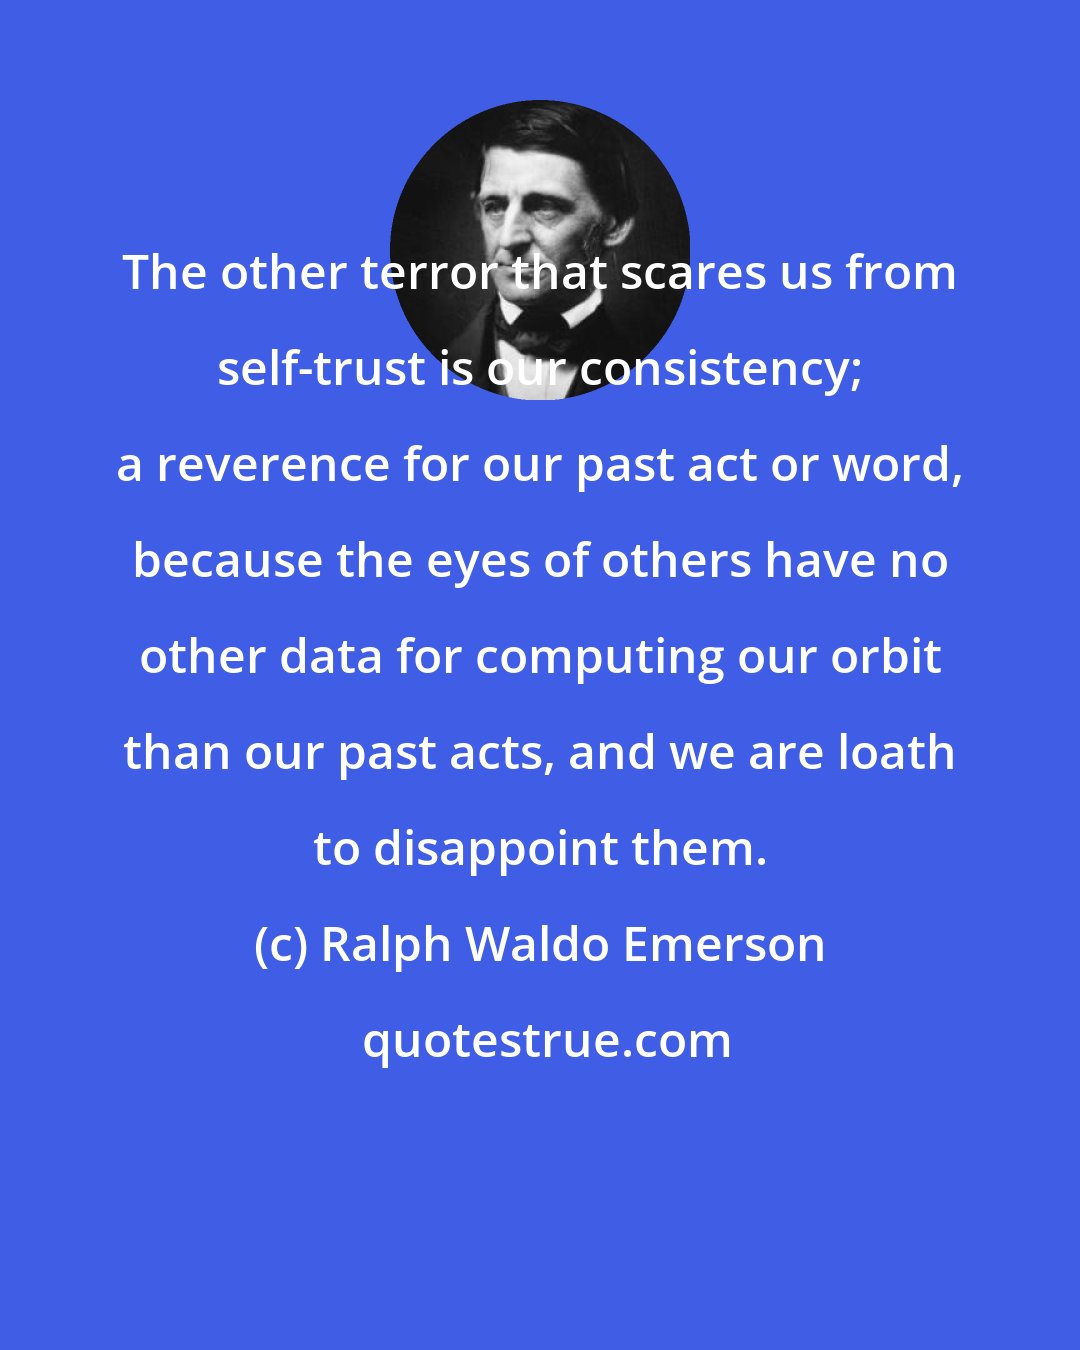 Ralph Waldo Emerson: The other terror that scares us from self-trust is our consistency; a reverence for our past act or word, because the eyes of others have no other data for computing our orbit than our past acts, and we are loath to disappoint them.